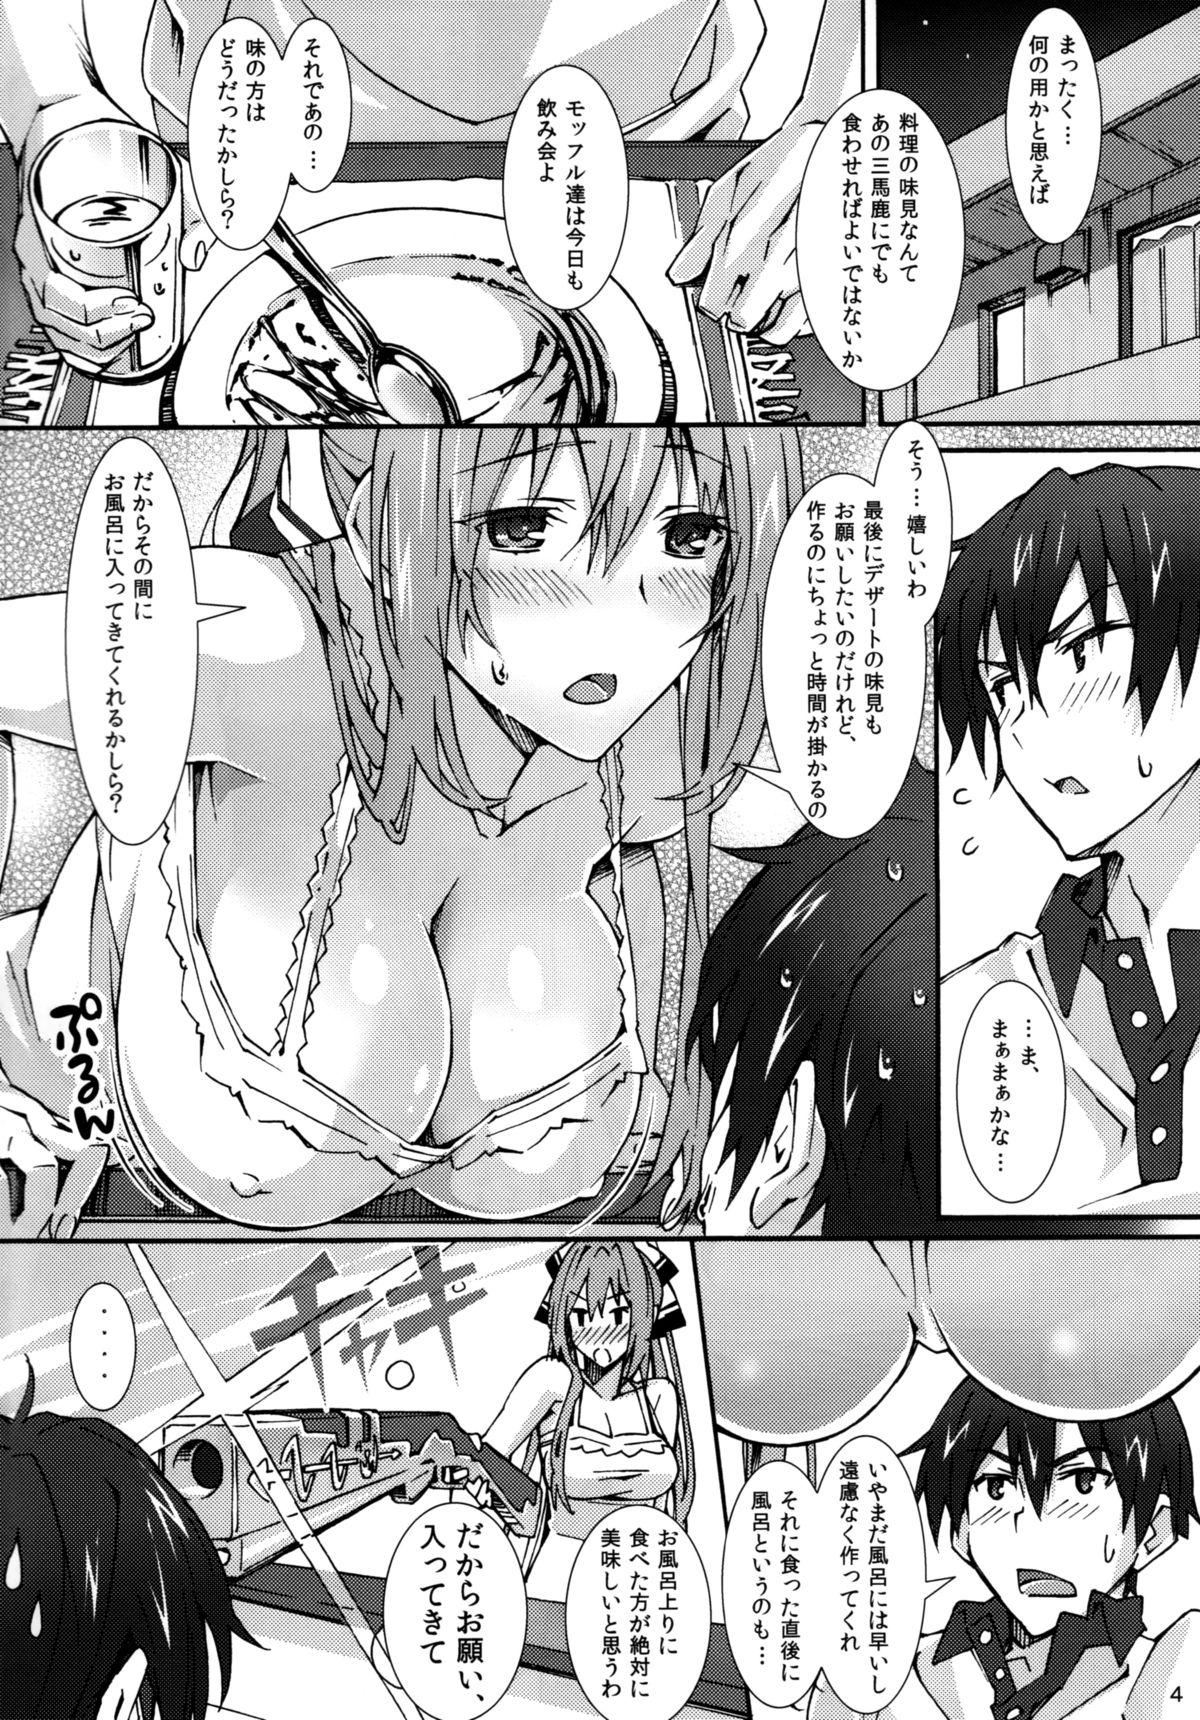 Tattoo Real Intention - Amagi brilliant park Dad - Page 4